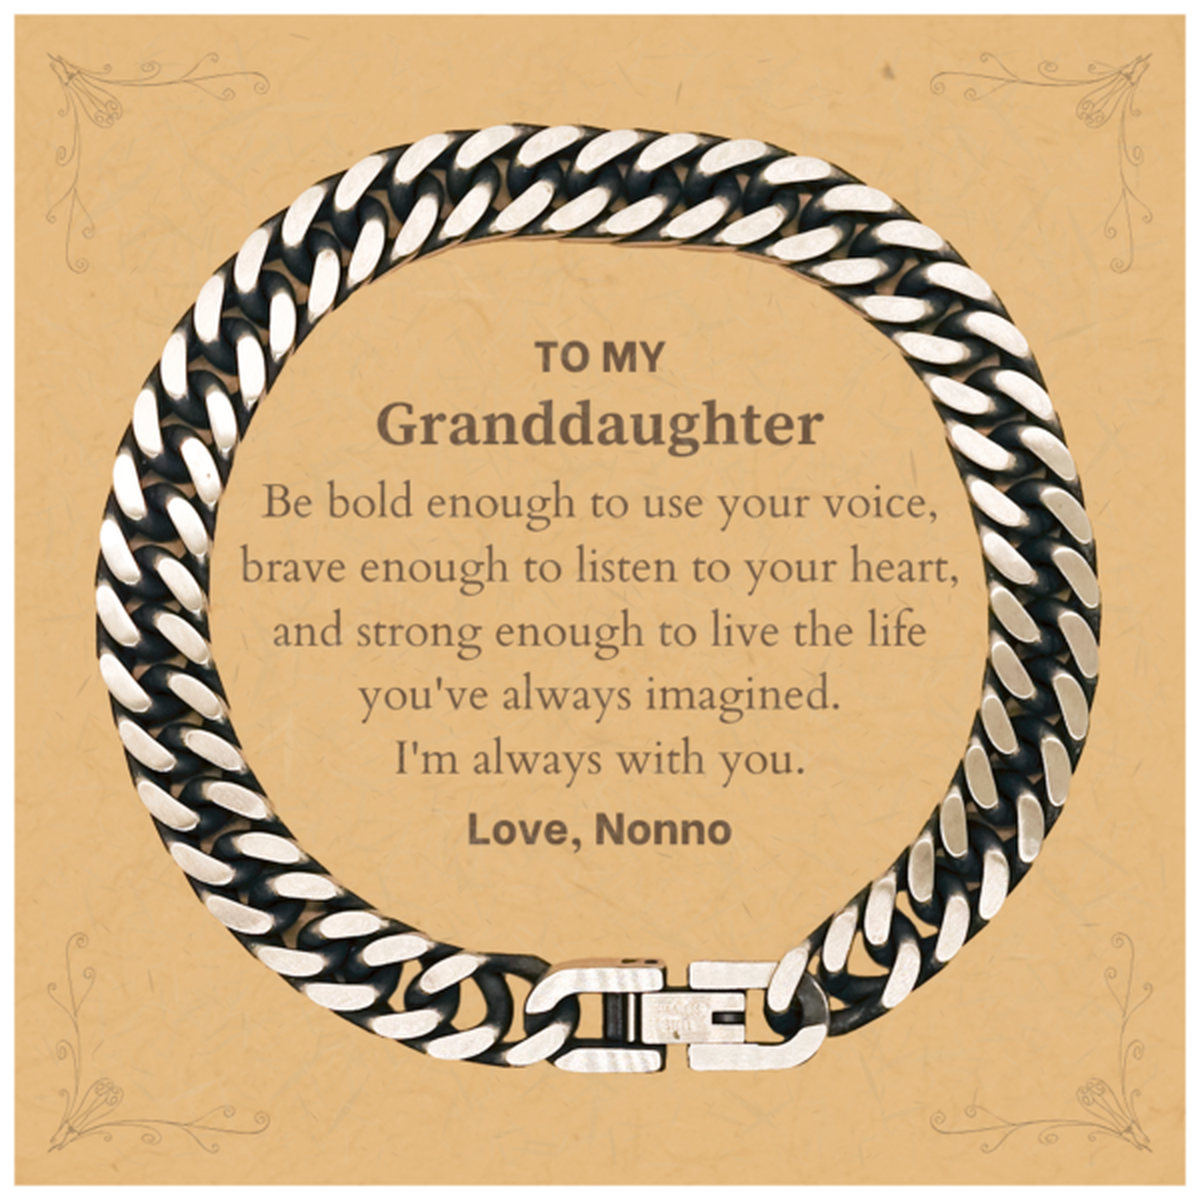 Keepsake Granddaughter Cuban Link Chain Bracelet Gift Idea Graduation Christmas Birthday Granddaughter from Nonno, Granddaughter Be bold enough to use your voice, brave enough to listen to your heart. Love, Nonno